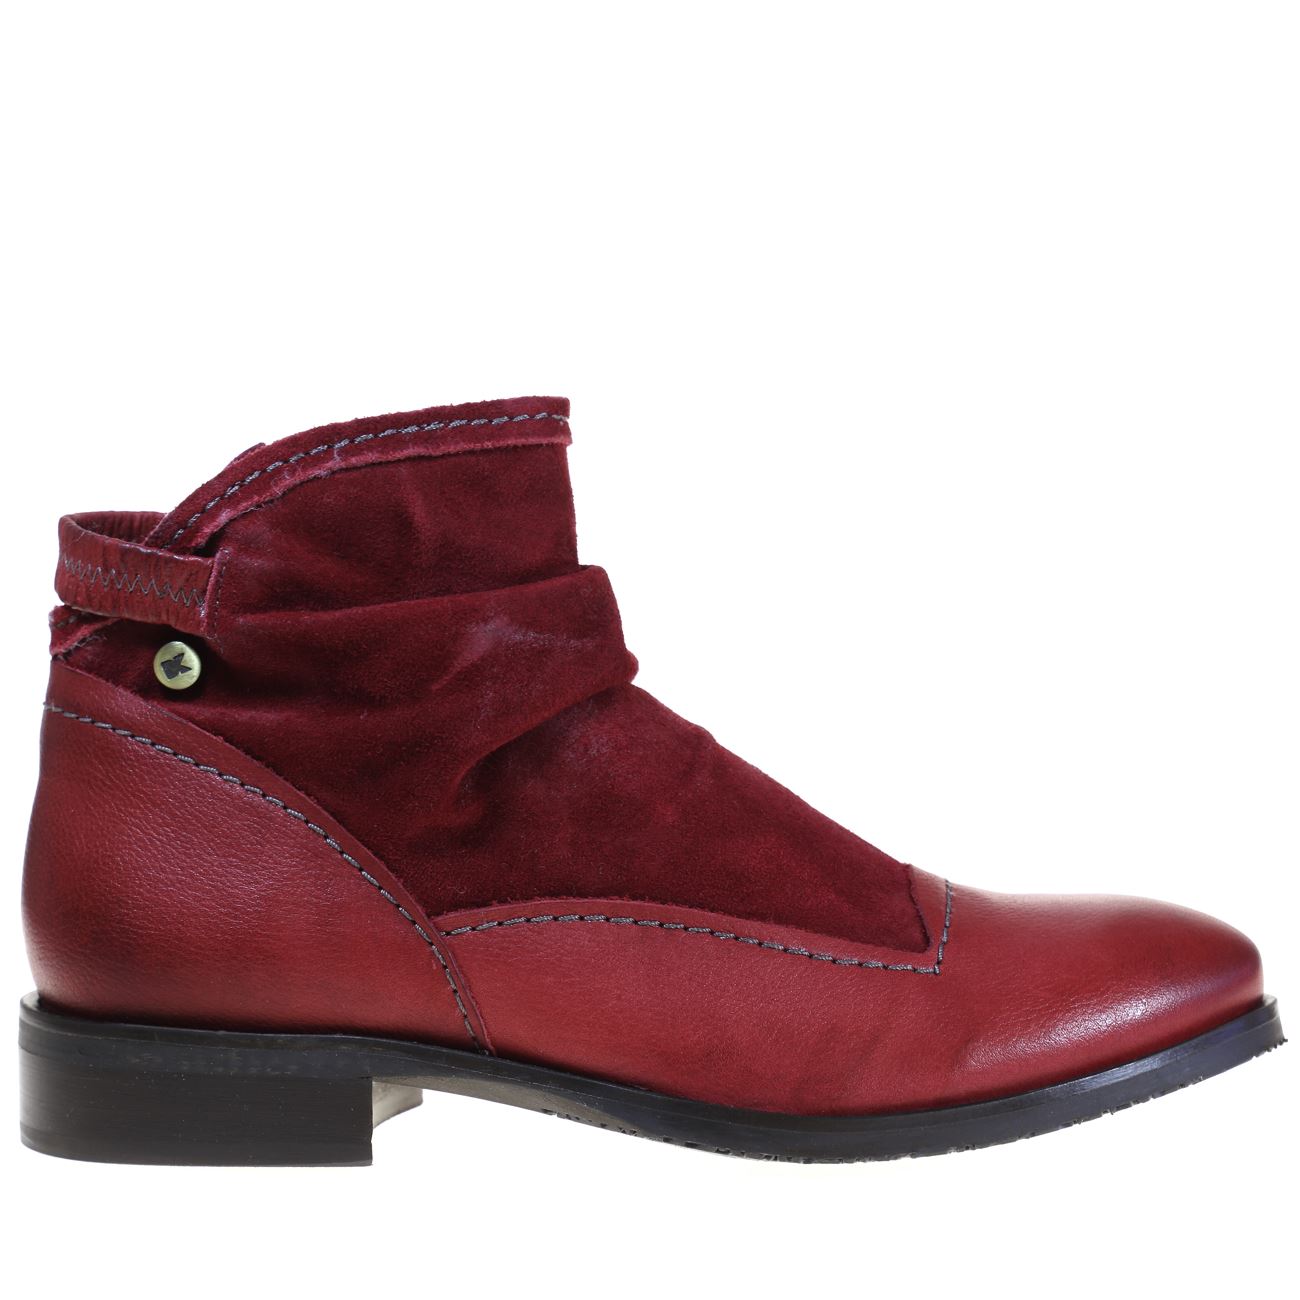 Dkode, DKW18-Hyria, Boots, Leather, Red Boots Dkode Red 36 